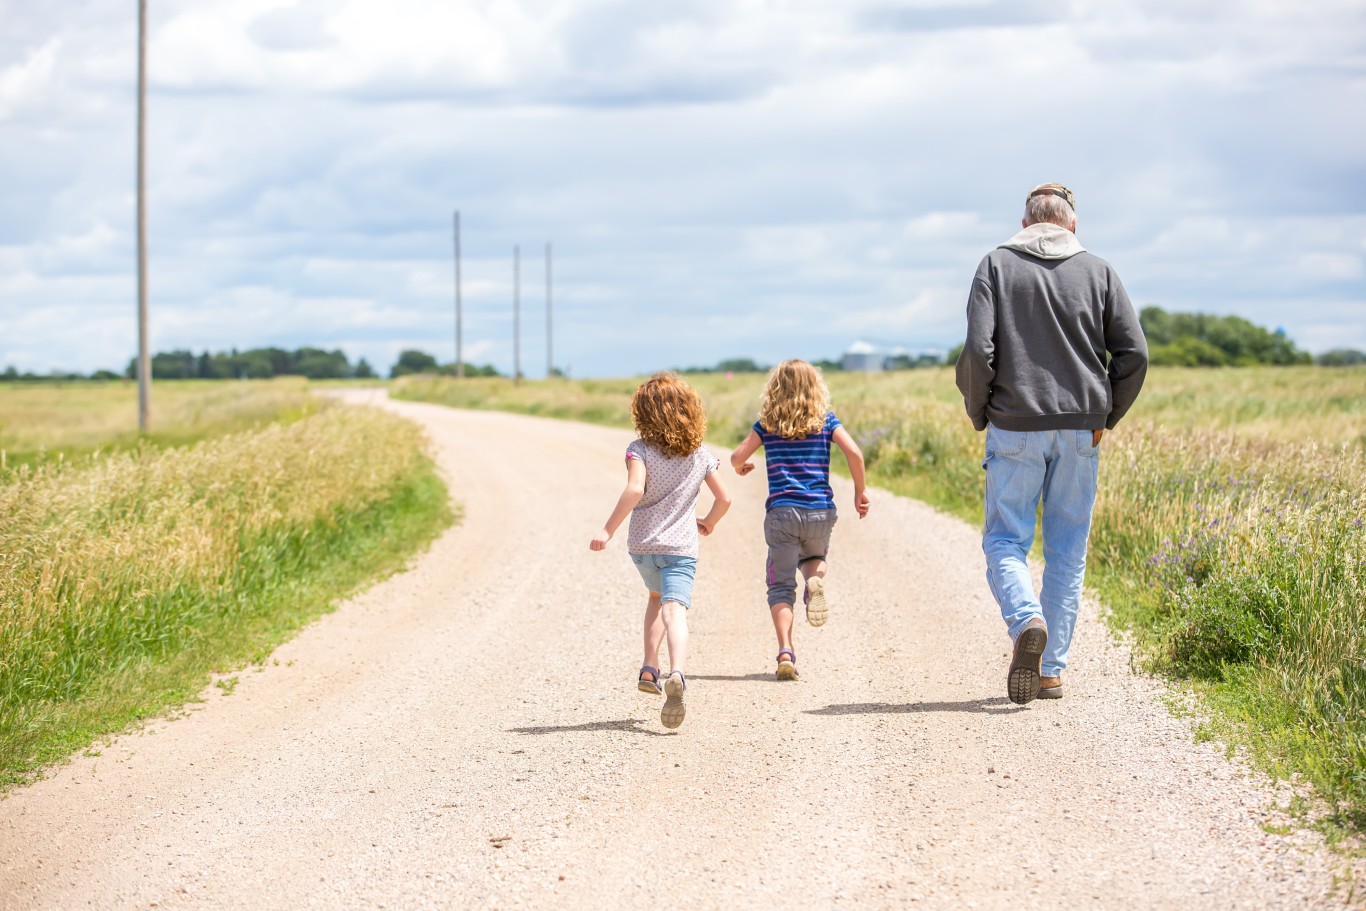 Two young girls run on a gravel road beside a walking older man. 